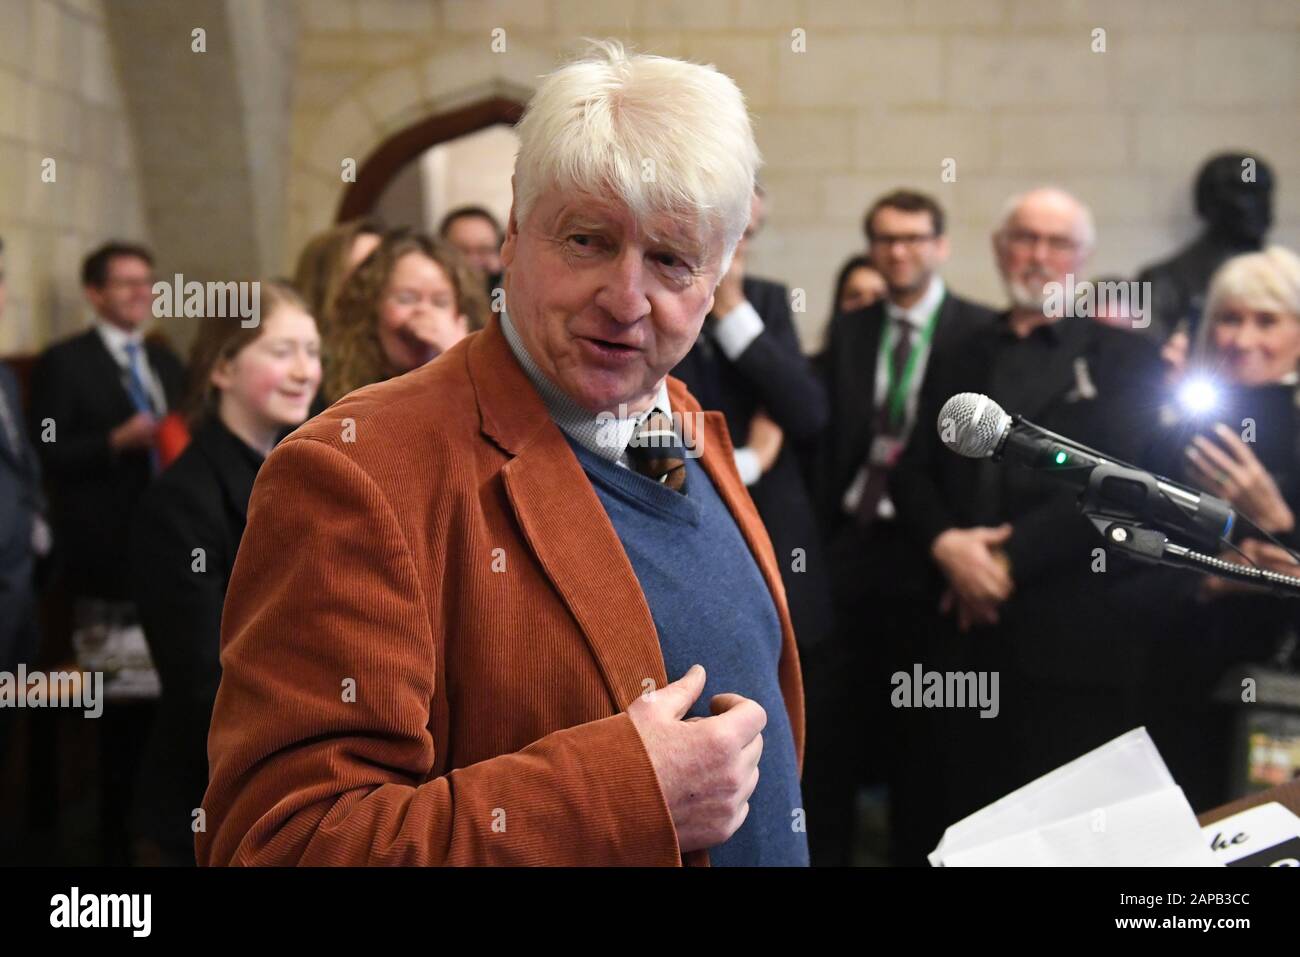 Stanley Johnson speaks at the Houses of Parliament in Westminster, London, during an event calling for a ban on trophy hunting imports. Stock Photo